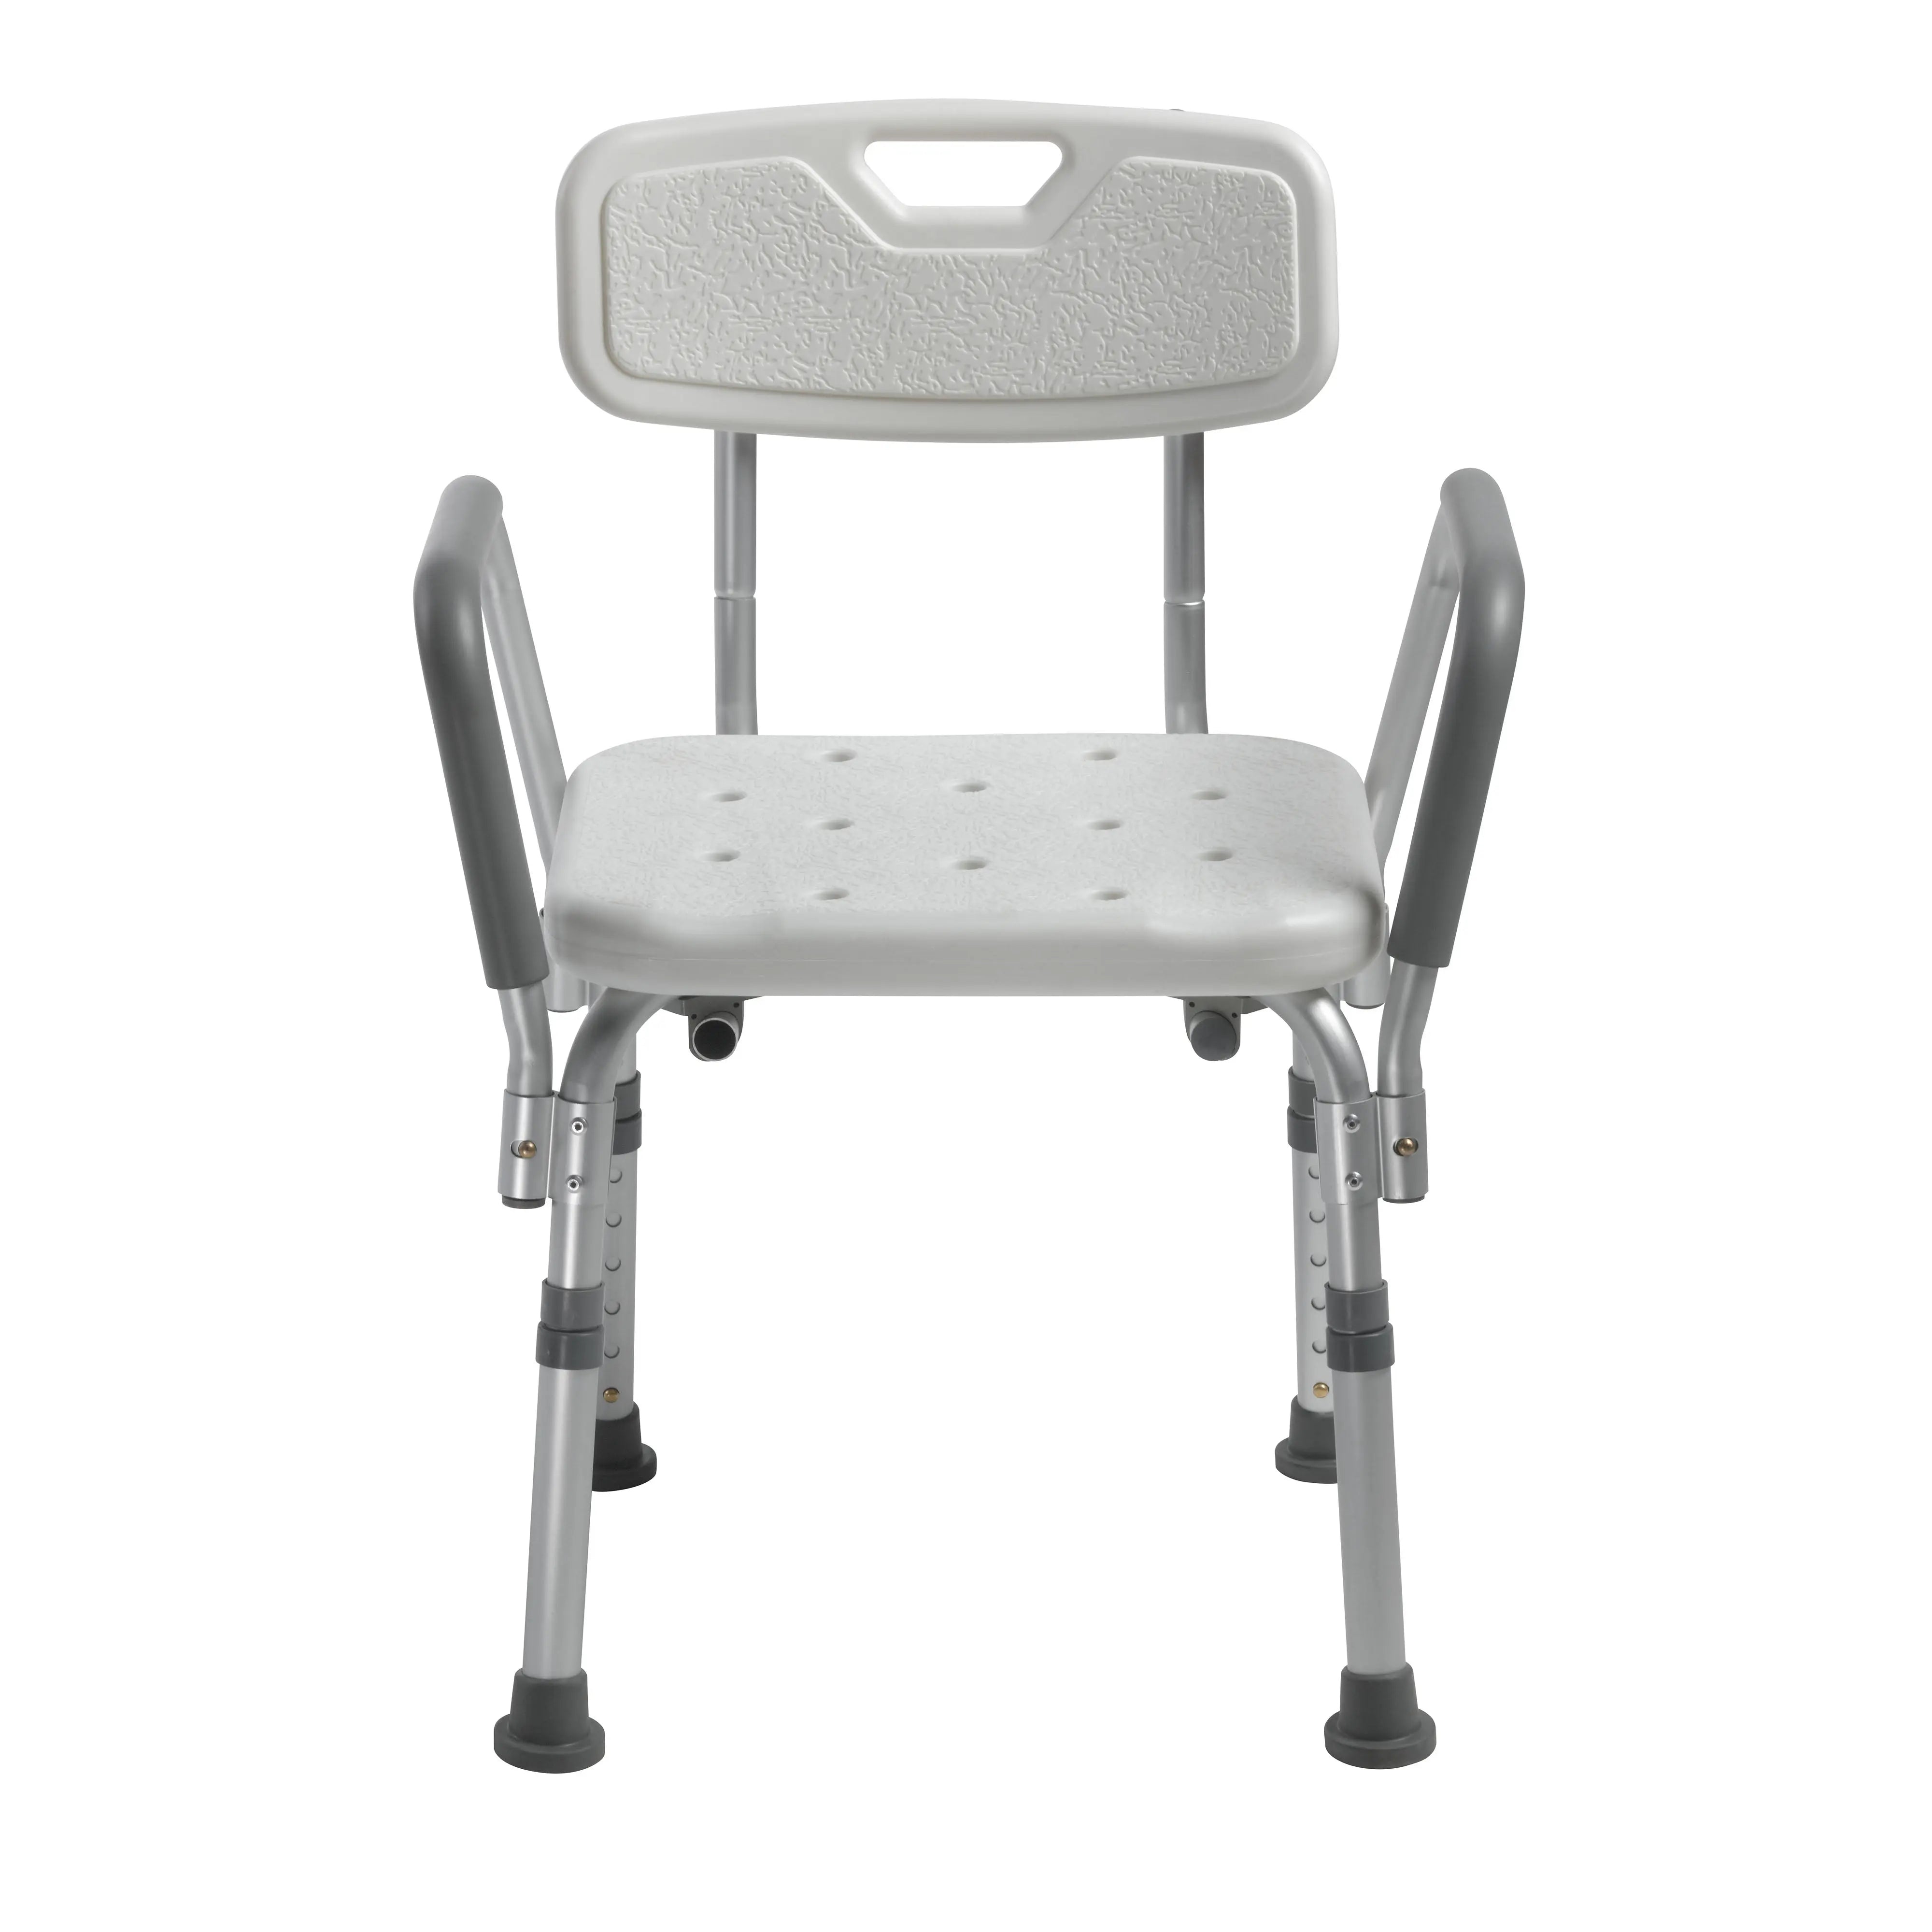 Knock Down Bath Bench with Back and Padded Arms - Home Health Store Inc